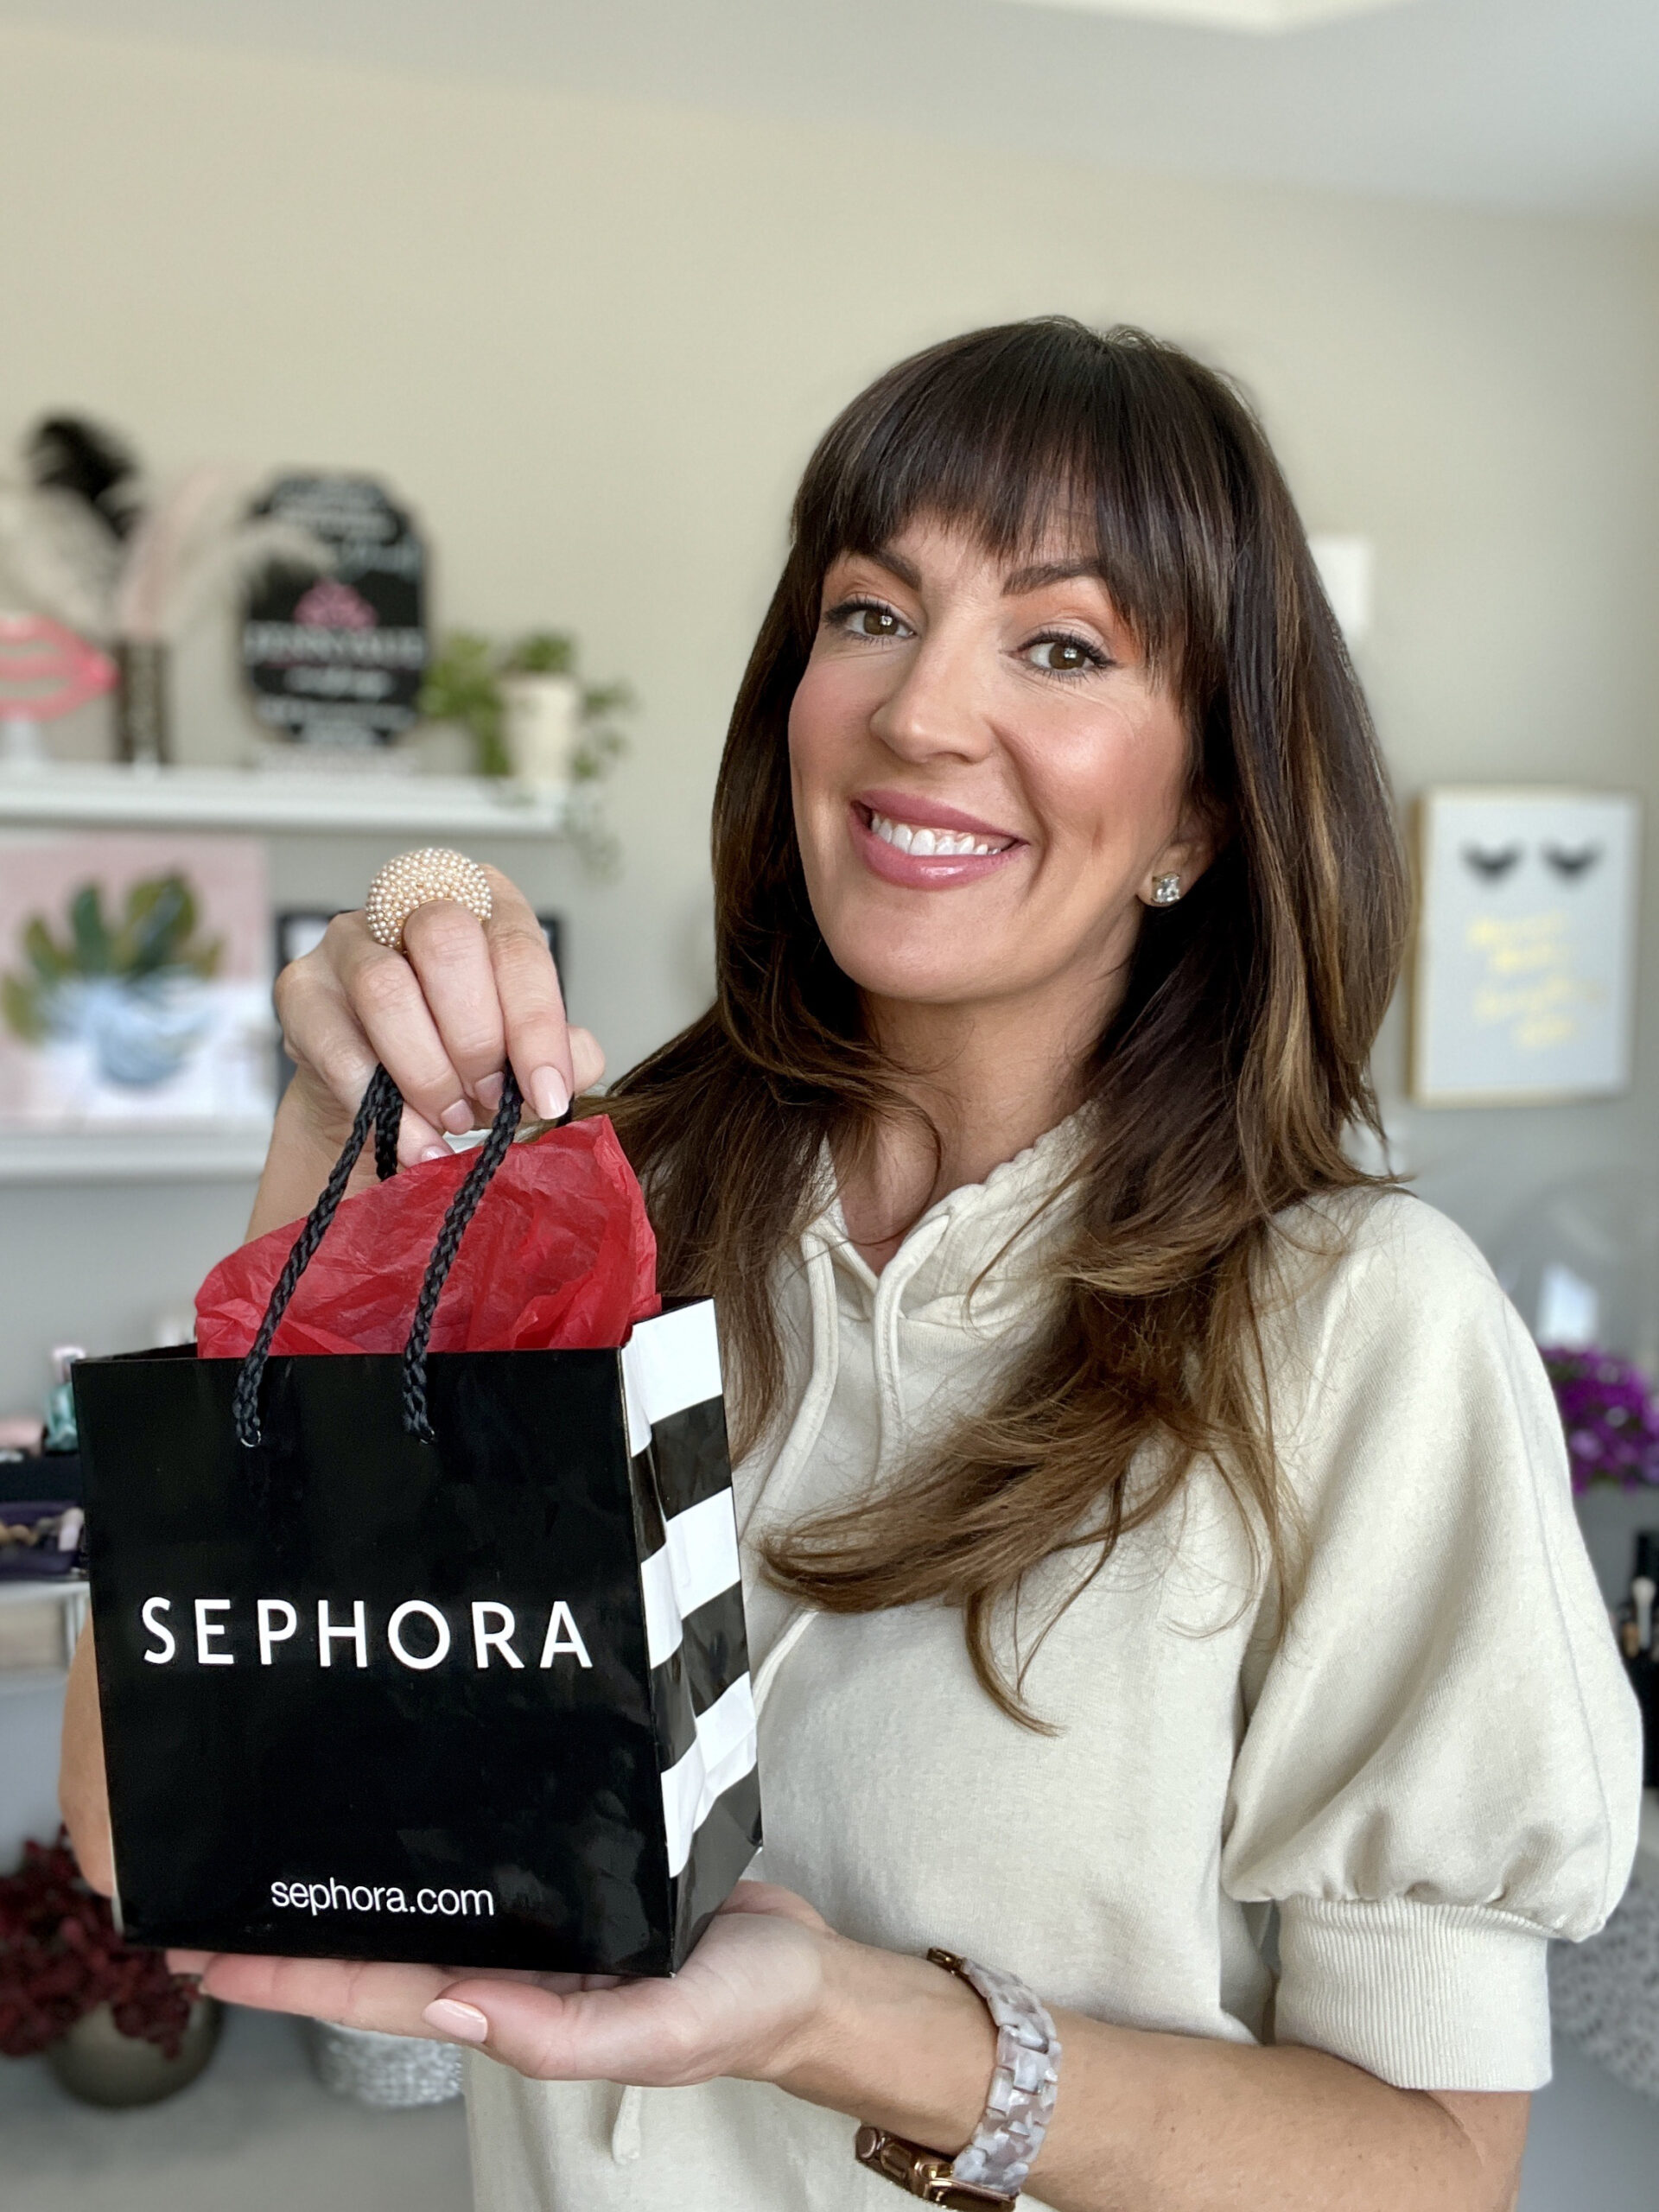 10 Things Under $10 at Sephora - Makeup and Beauty Blog